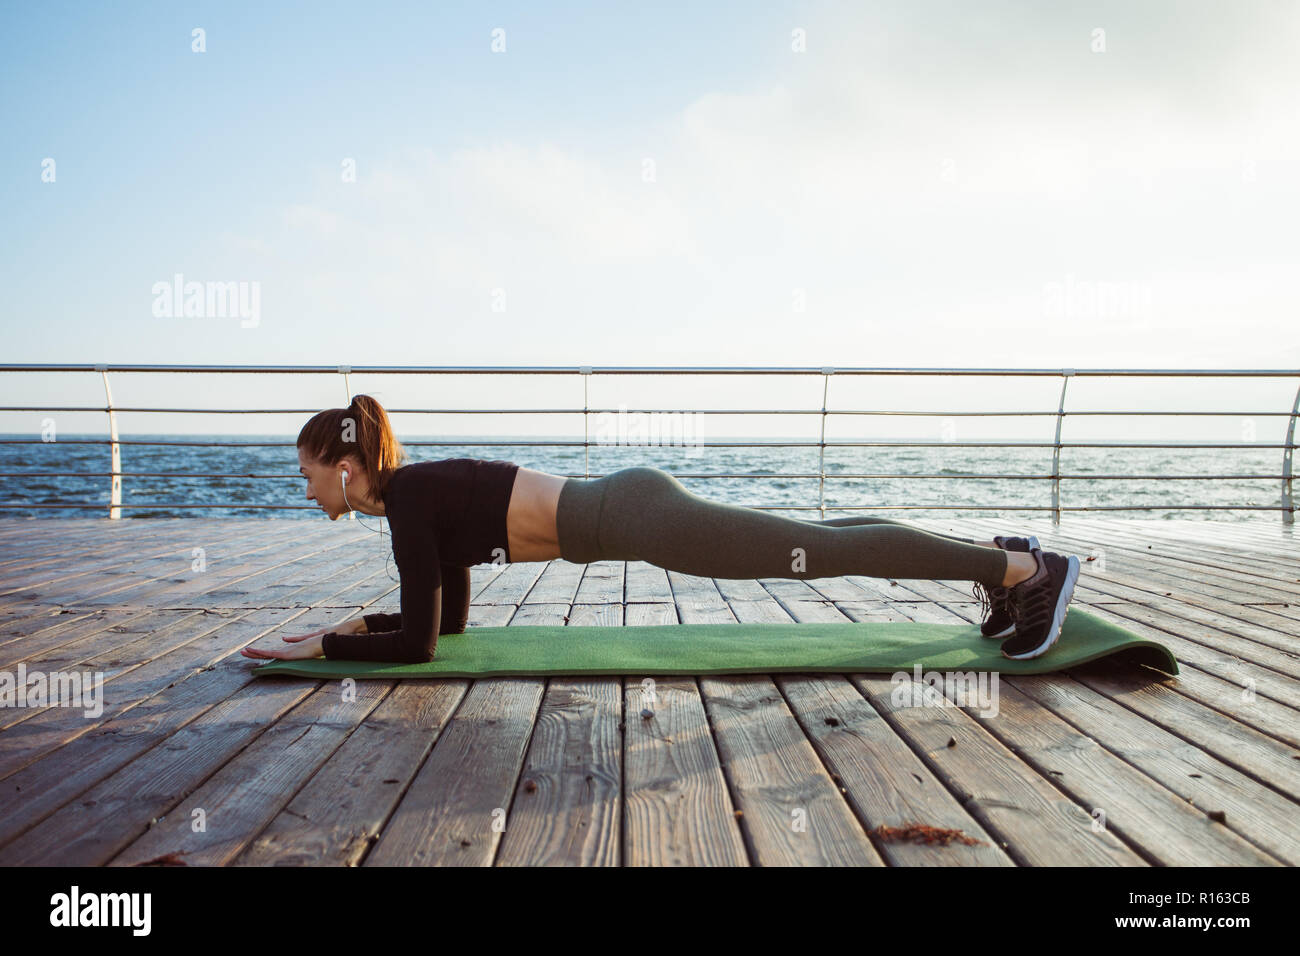 Fitness woman doing push ups Outdoor training workout Stock Photo